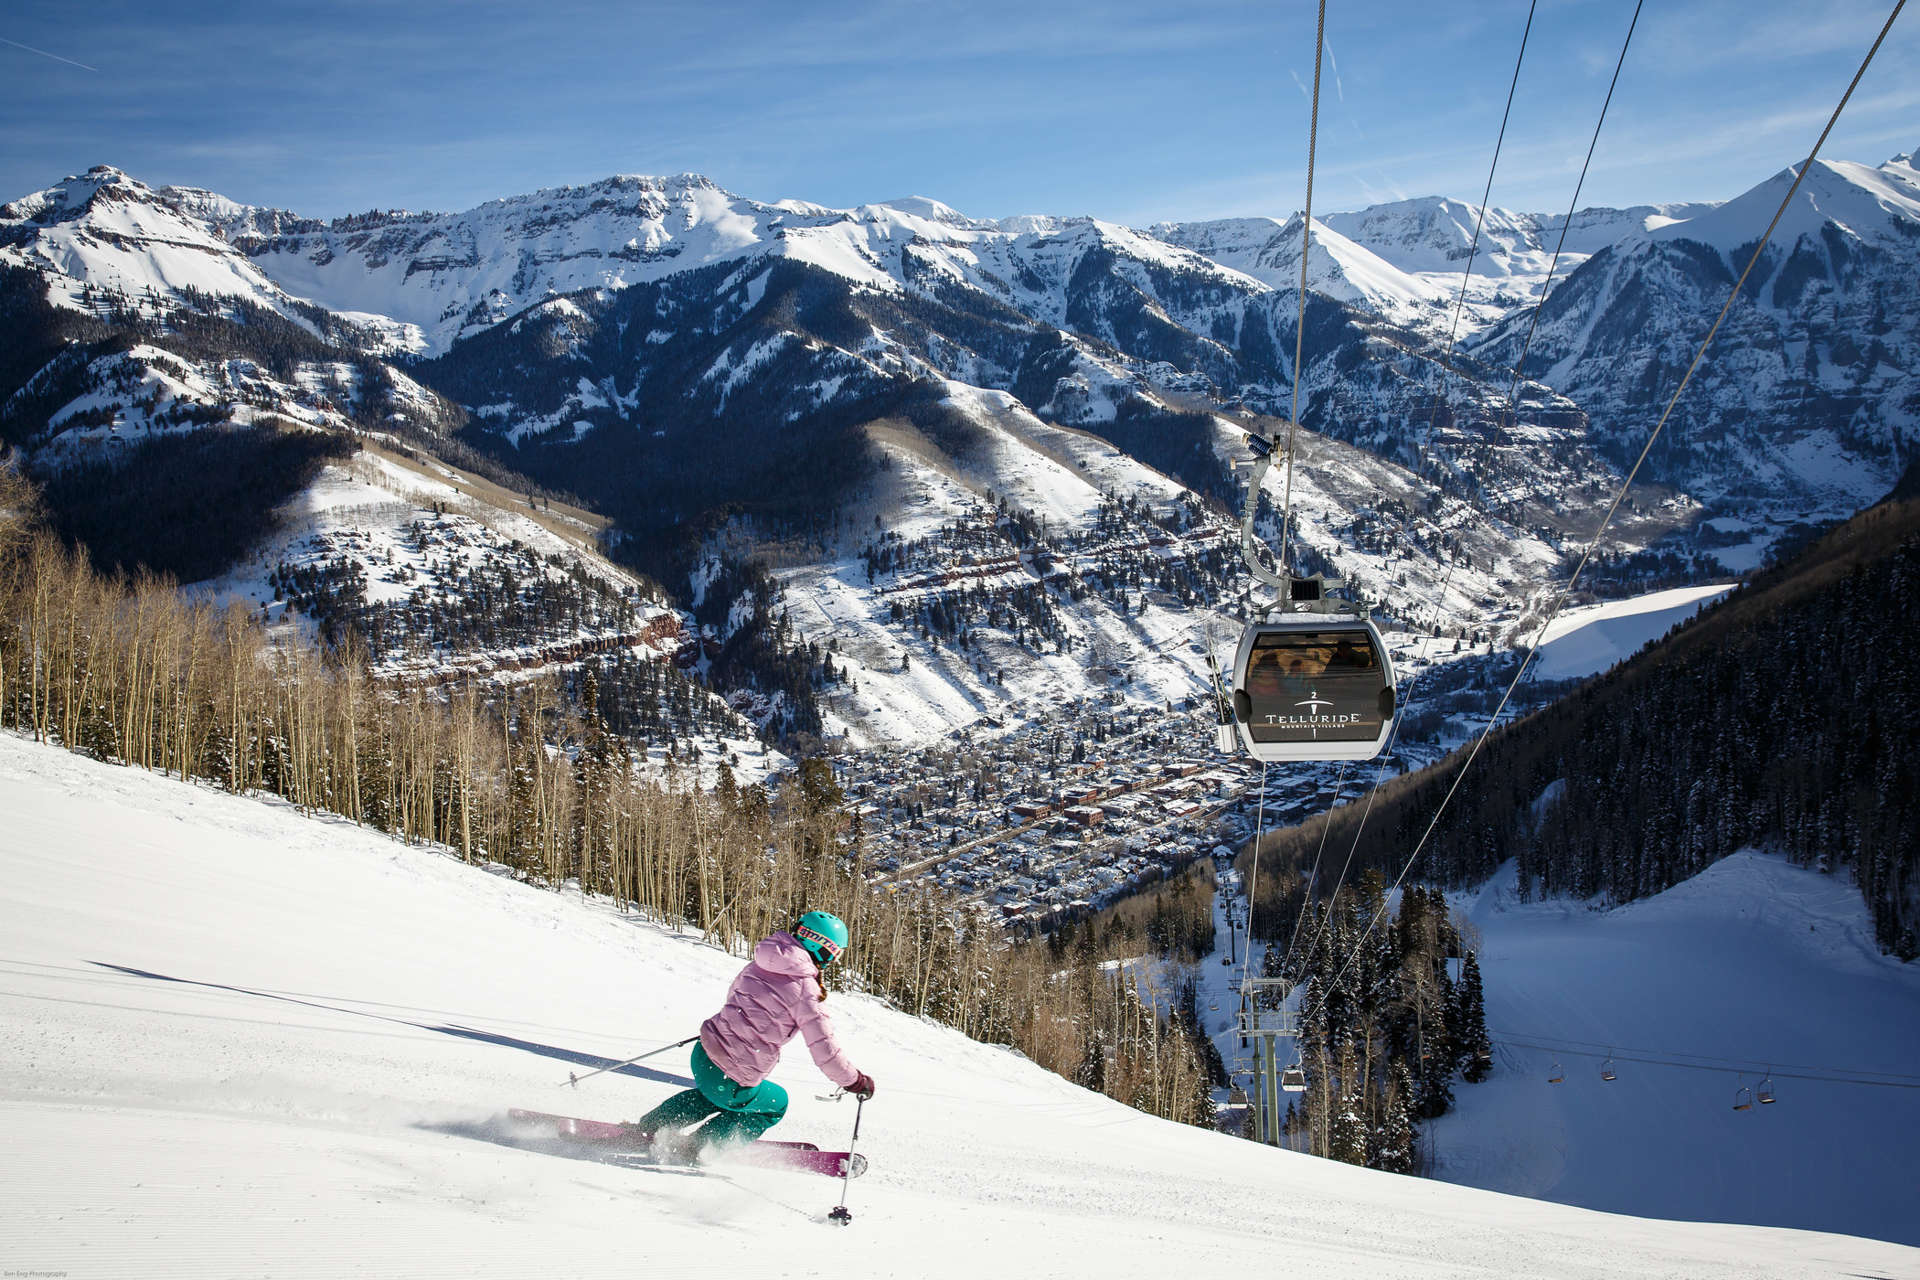 Telluride Ski Packages, Lowest Prices, Best Ski Deals Guarantee